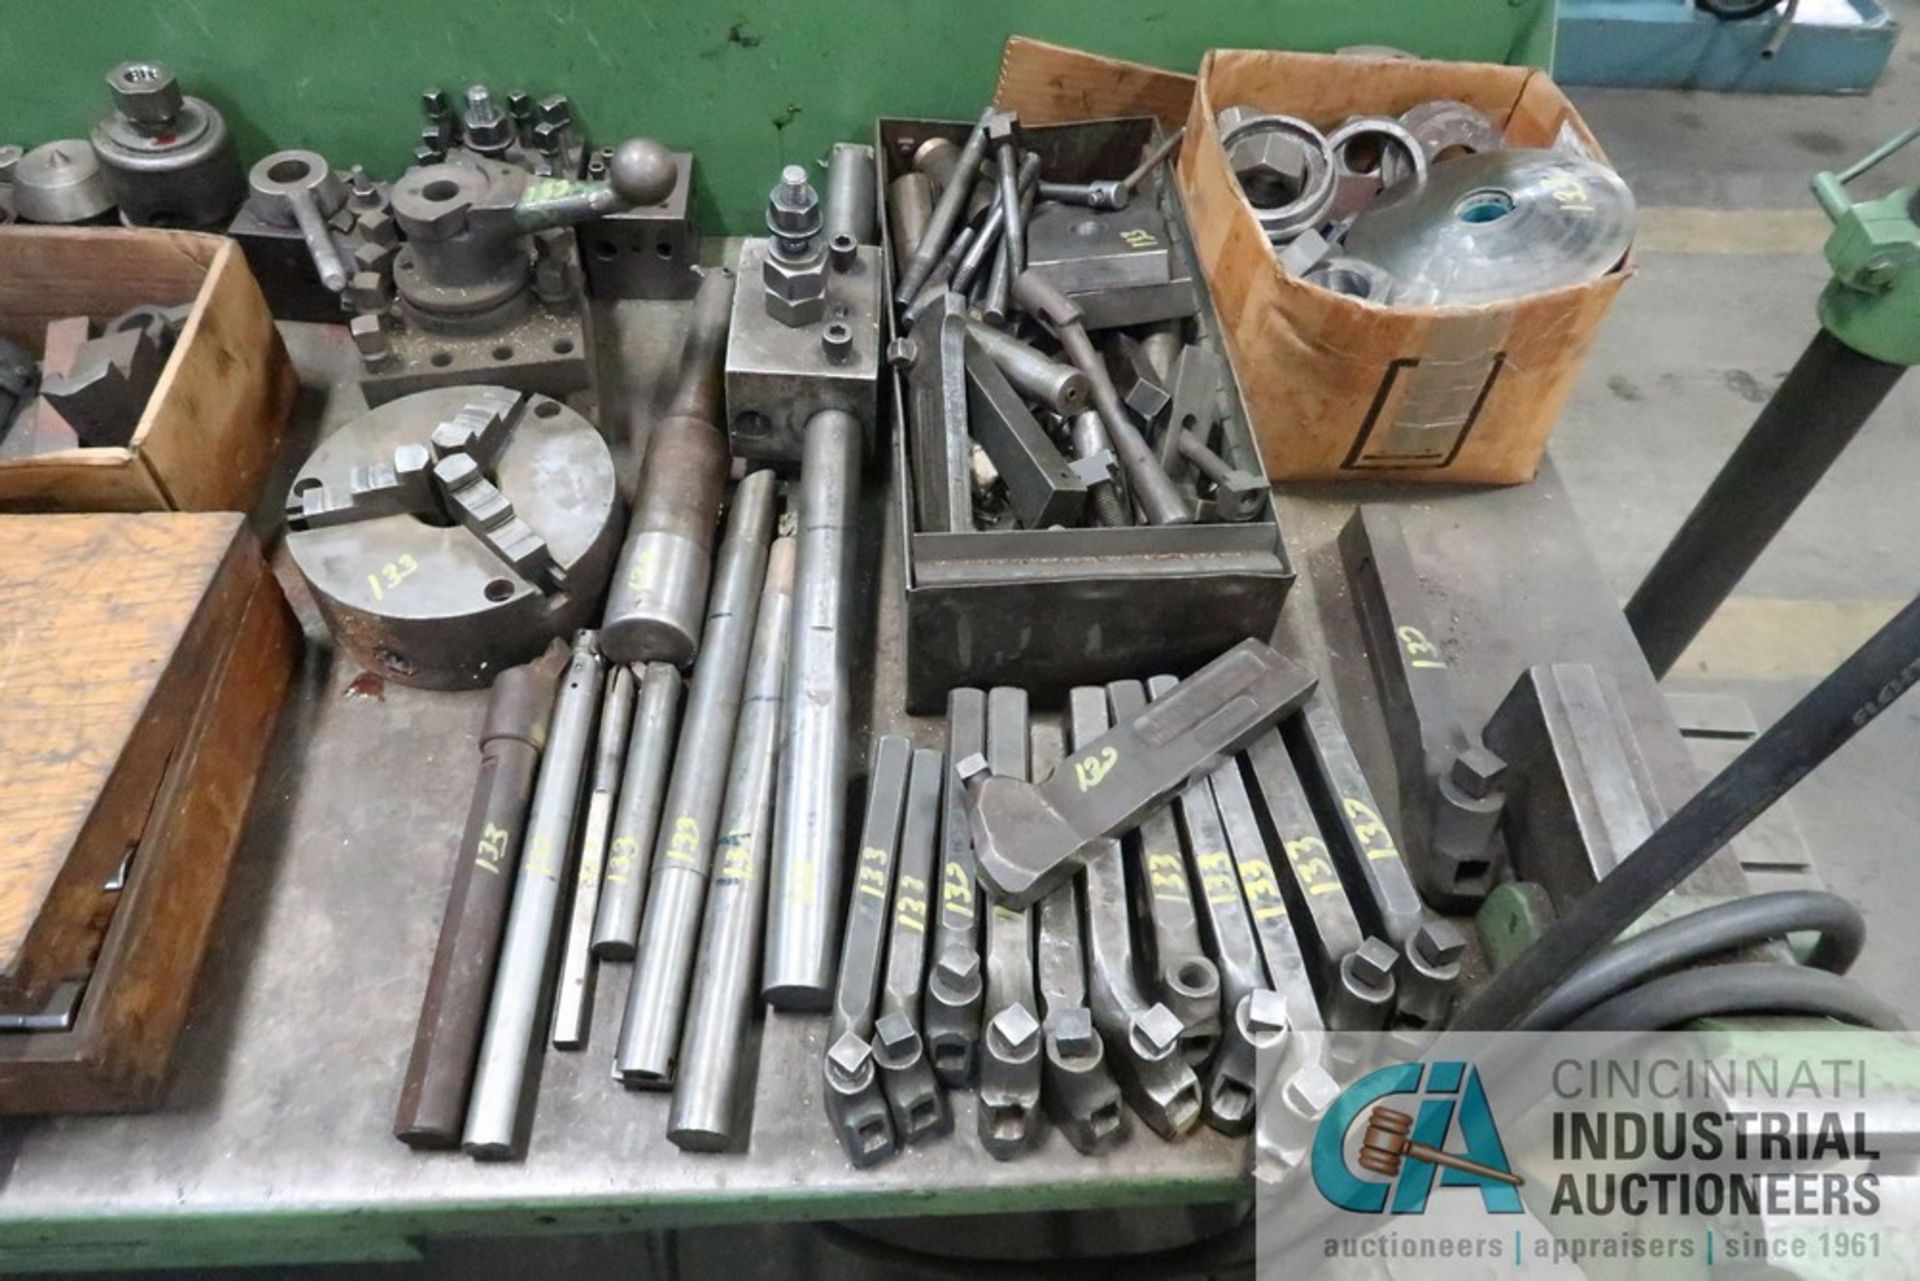 (LOT) BENCH WITH TOOLING; RADII CUTTER, COLLETS, TOOL POST, 8" 3-JAW CHUCK, LATHE TOOLING - Image 2 of 5